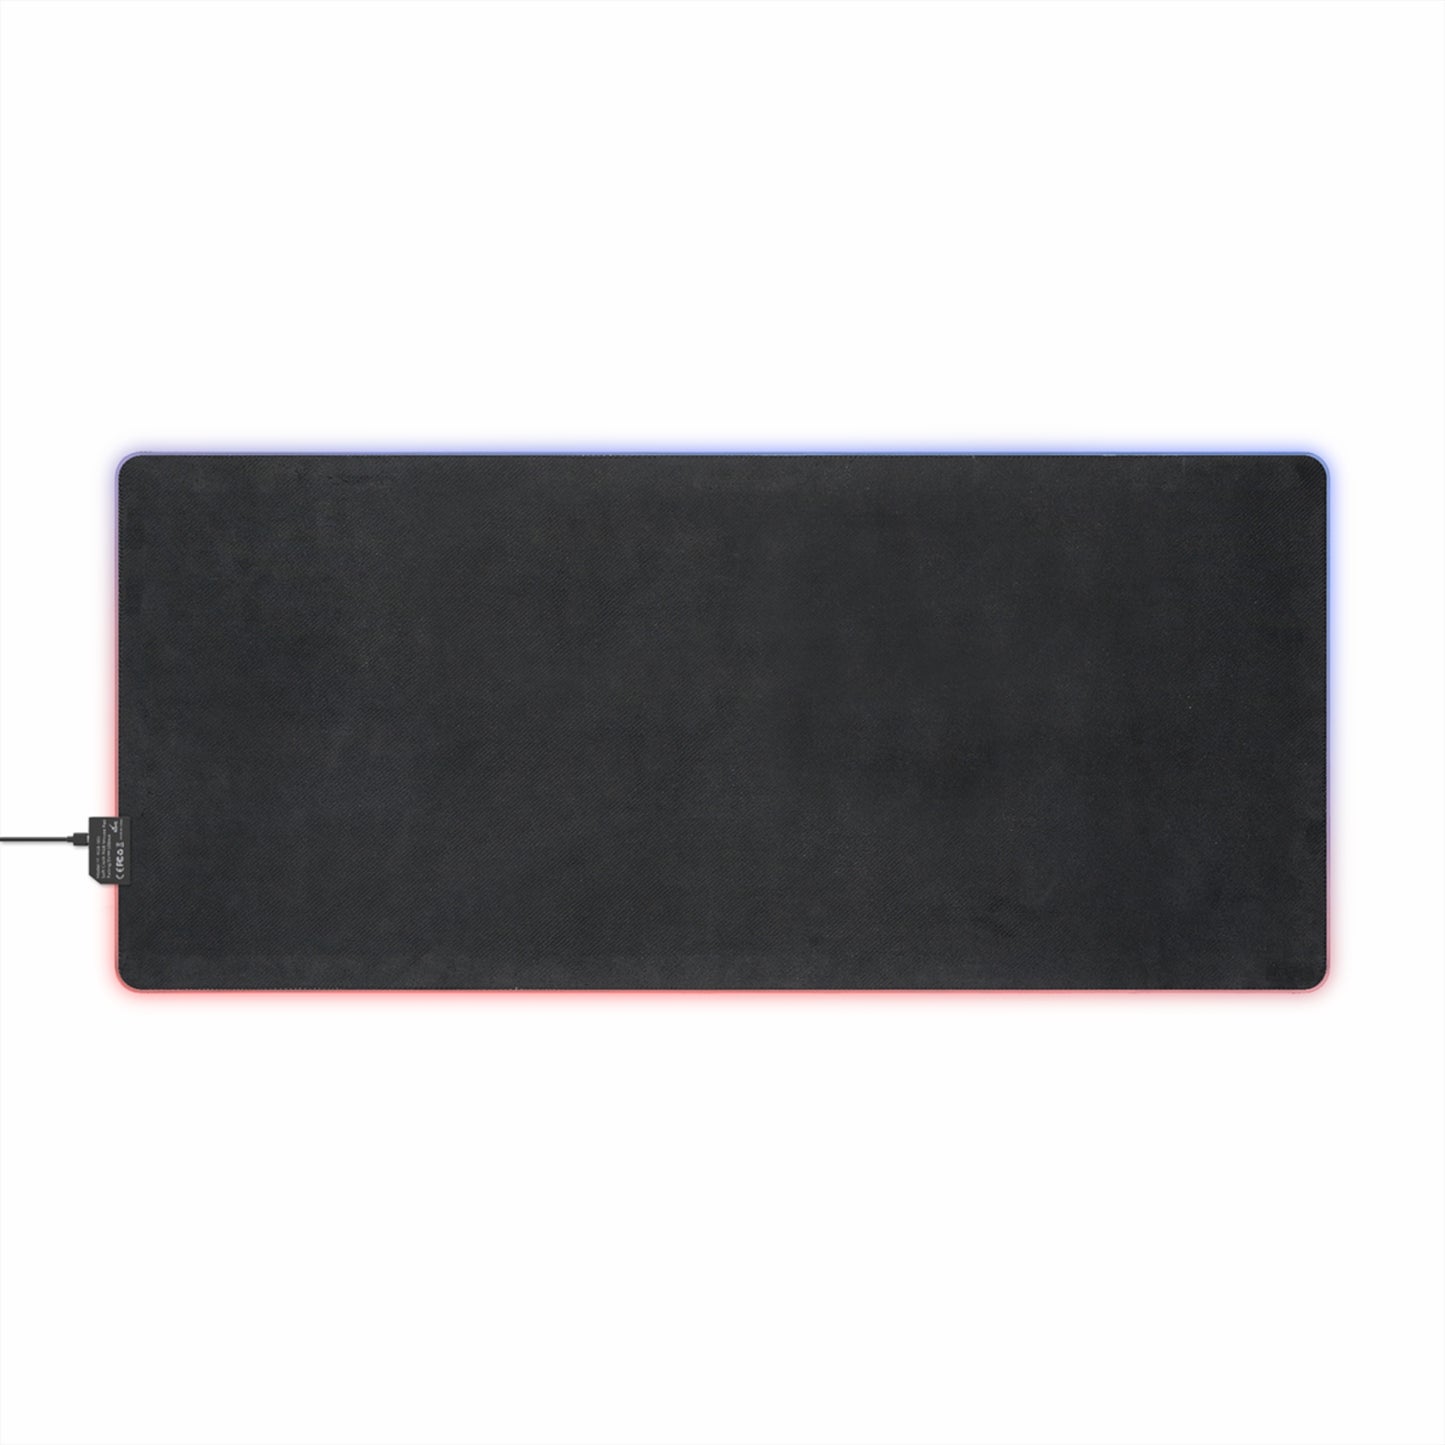 CLMP-12 LED Gaming Mouse Pad